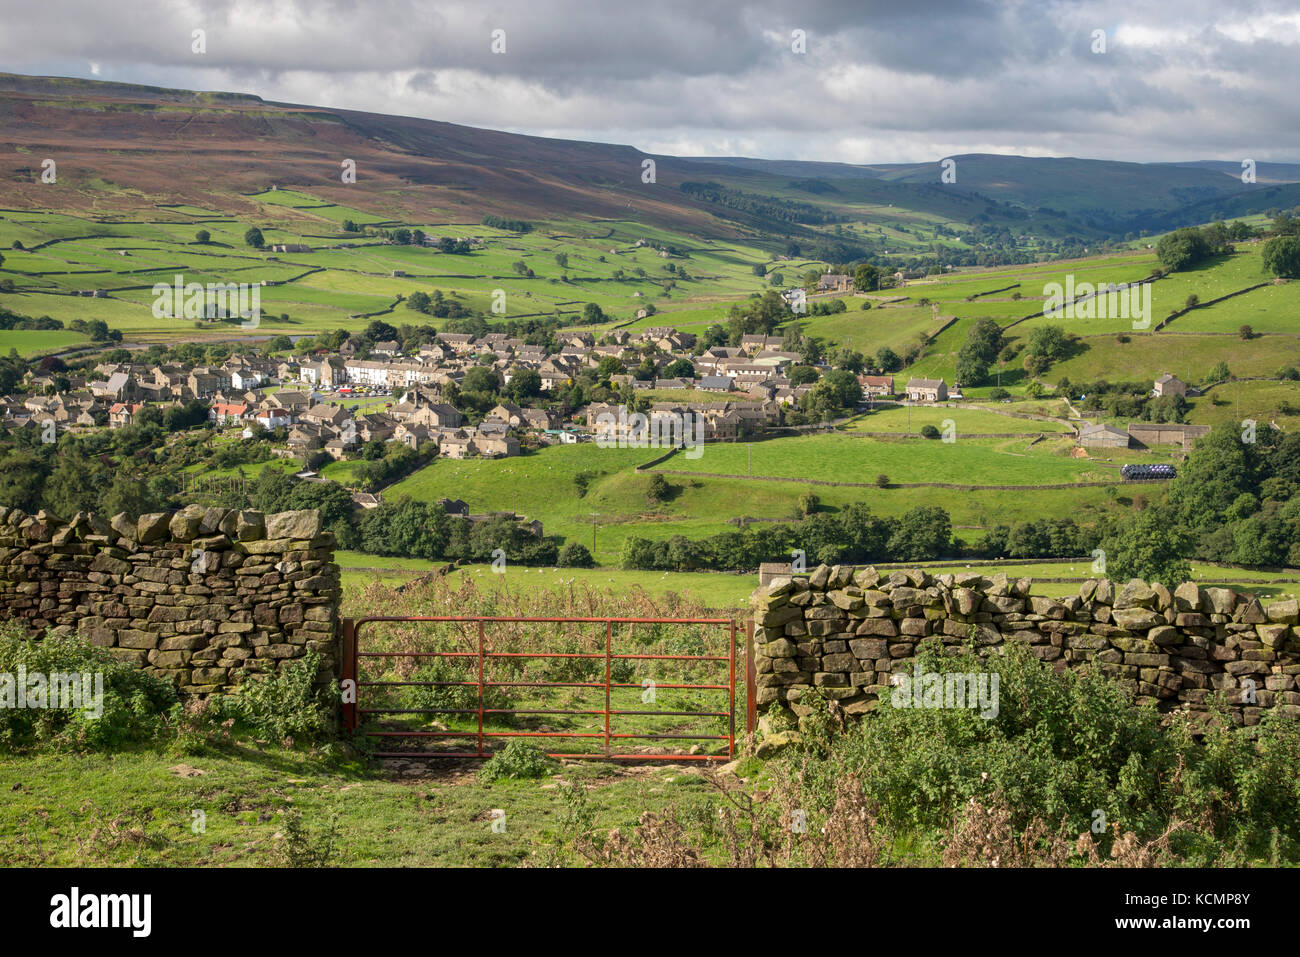 View of the village of Reeth from the hillside below Fremington edge in North Yorkshire, England. Stock Photo